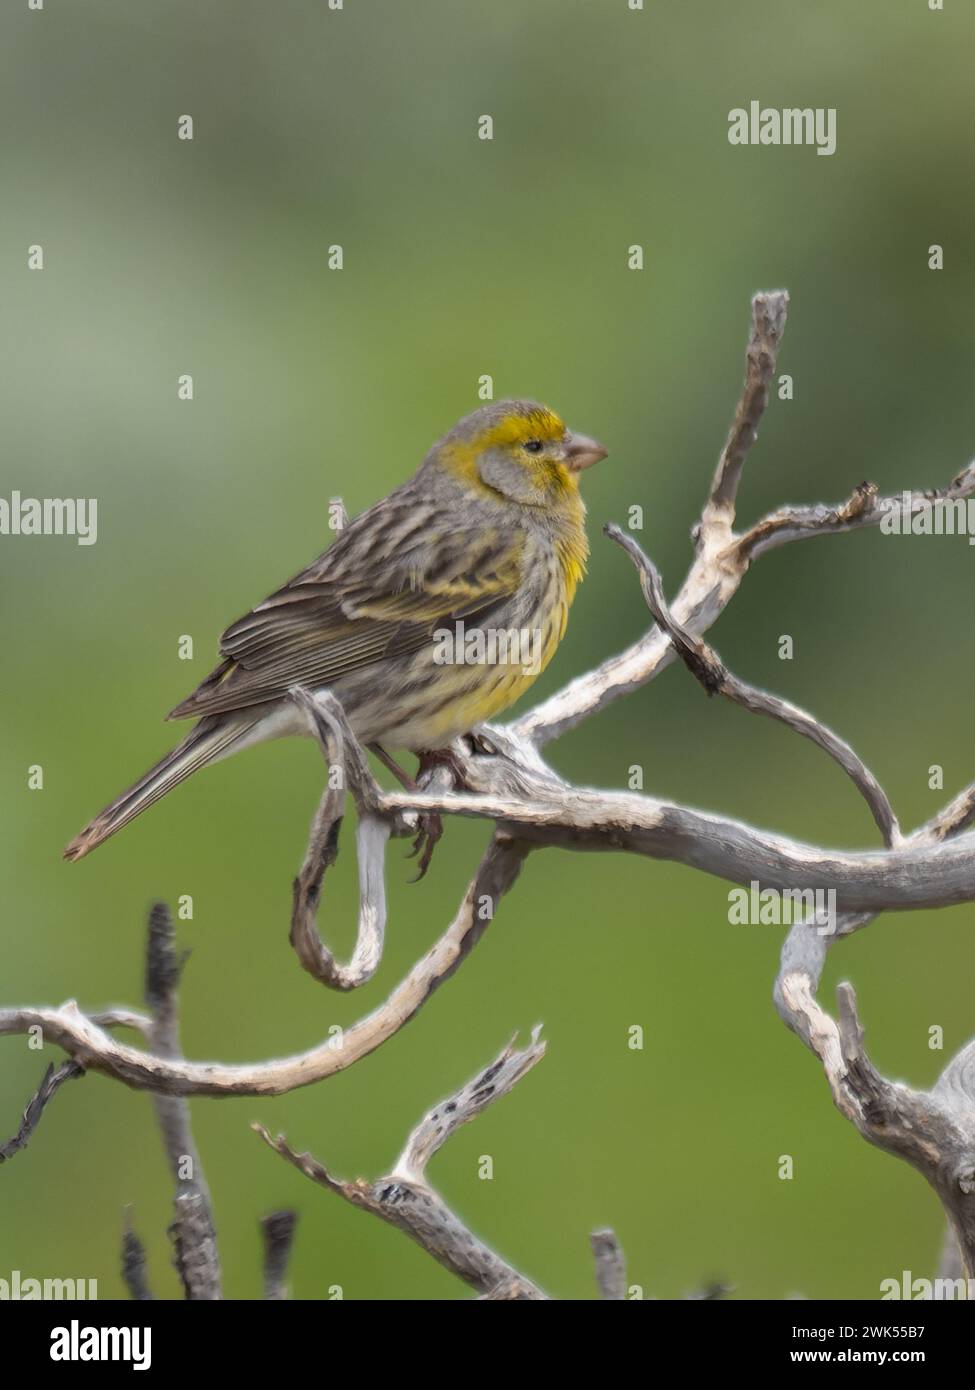 Atlantic canary, Serinus canaria, also known as the wild canary, island canary, common canary, or just canary Stock Photo